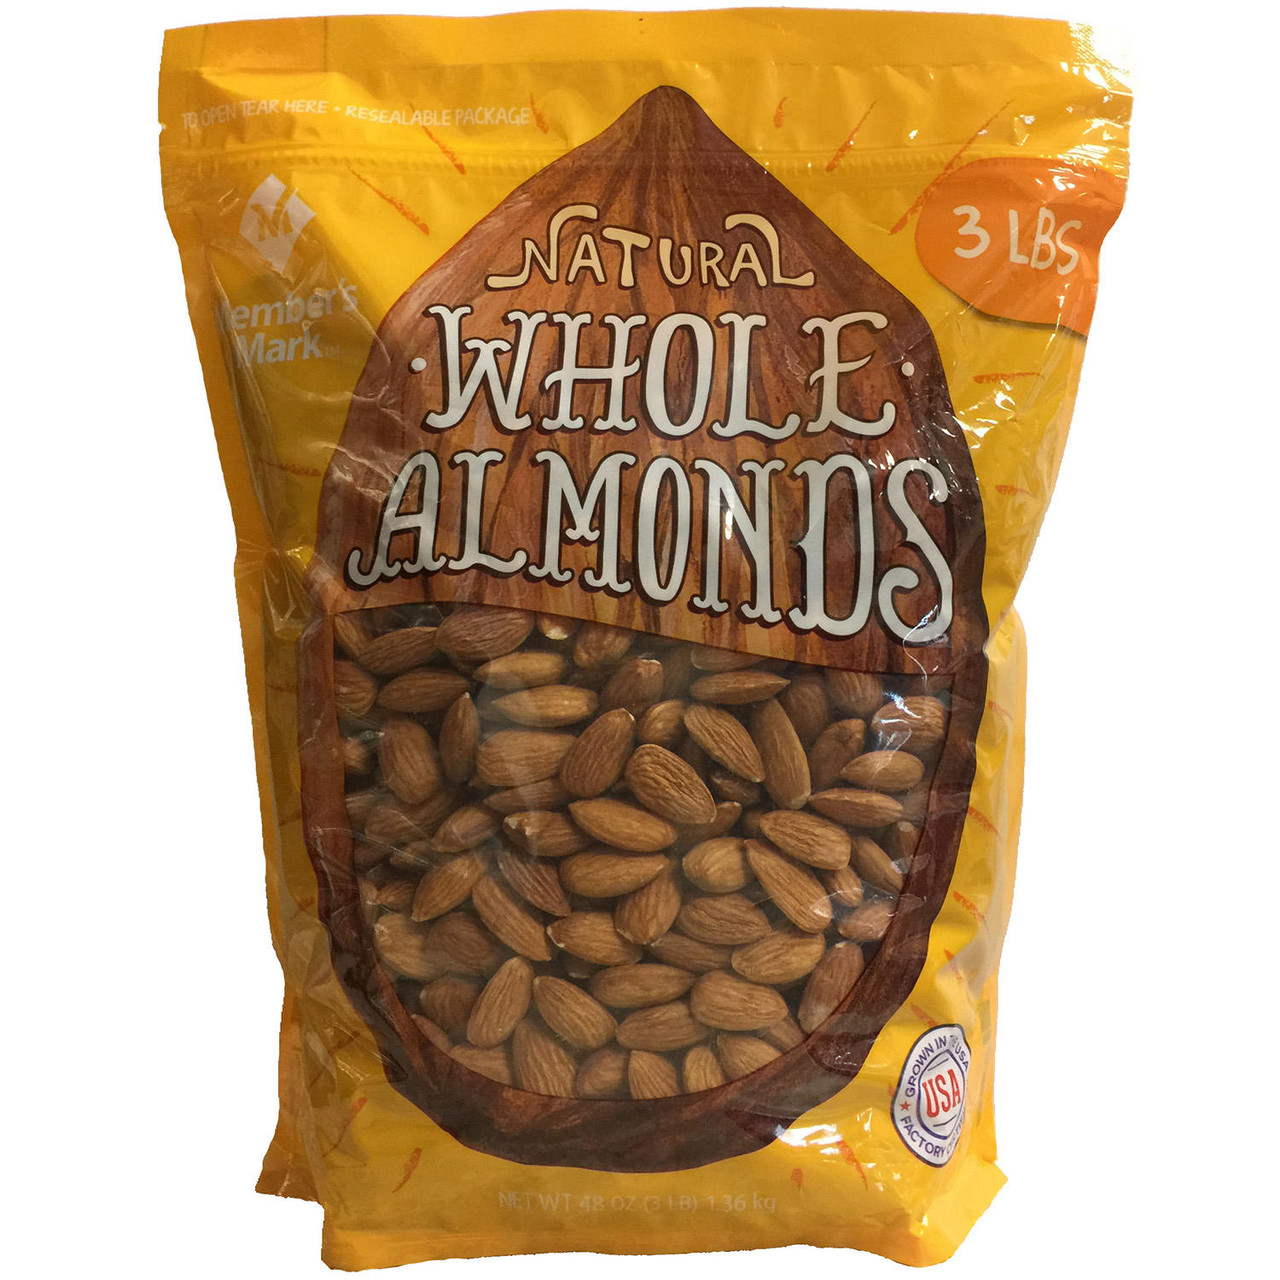 Member's Mark Natural Whole Almonds (3 lbs.) - [From 46.00 - Choose pk Qty ] - *Ships from Miami